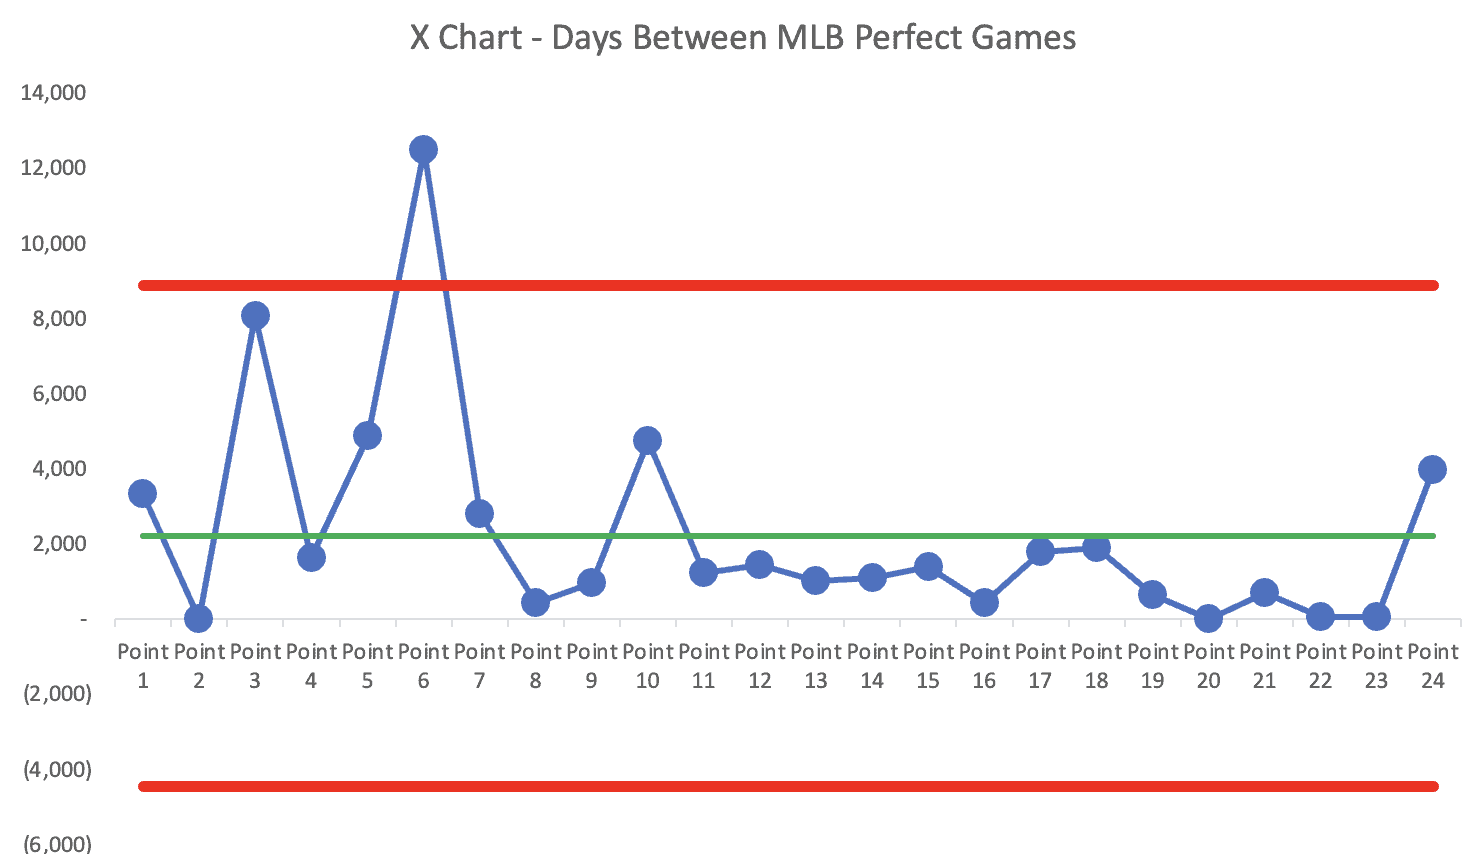 X Chart - Days between MLB Perfect Games